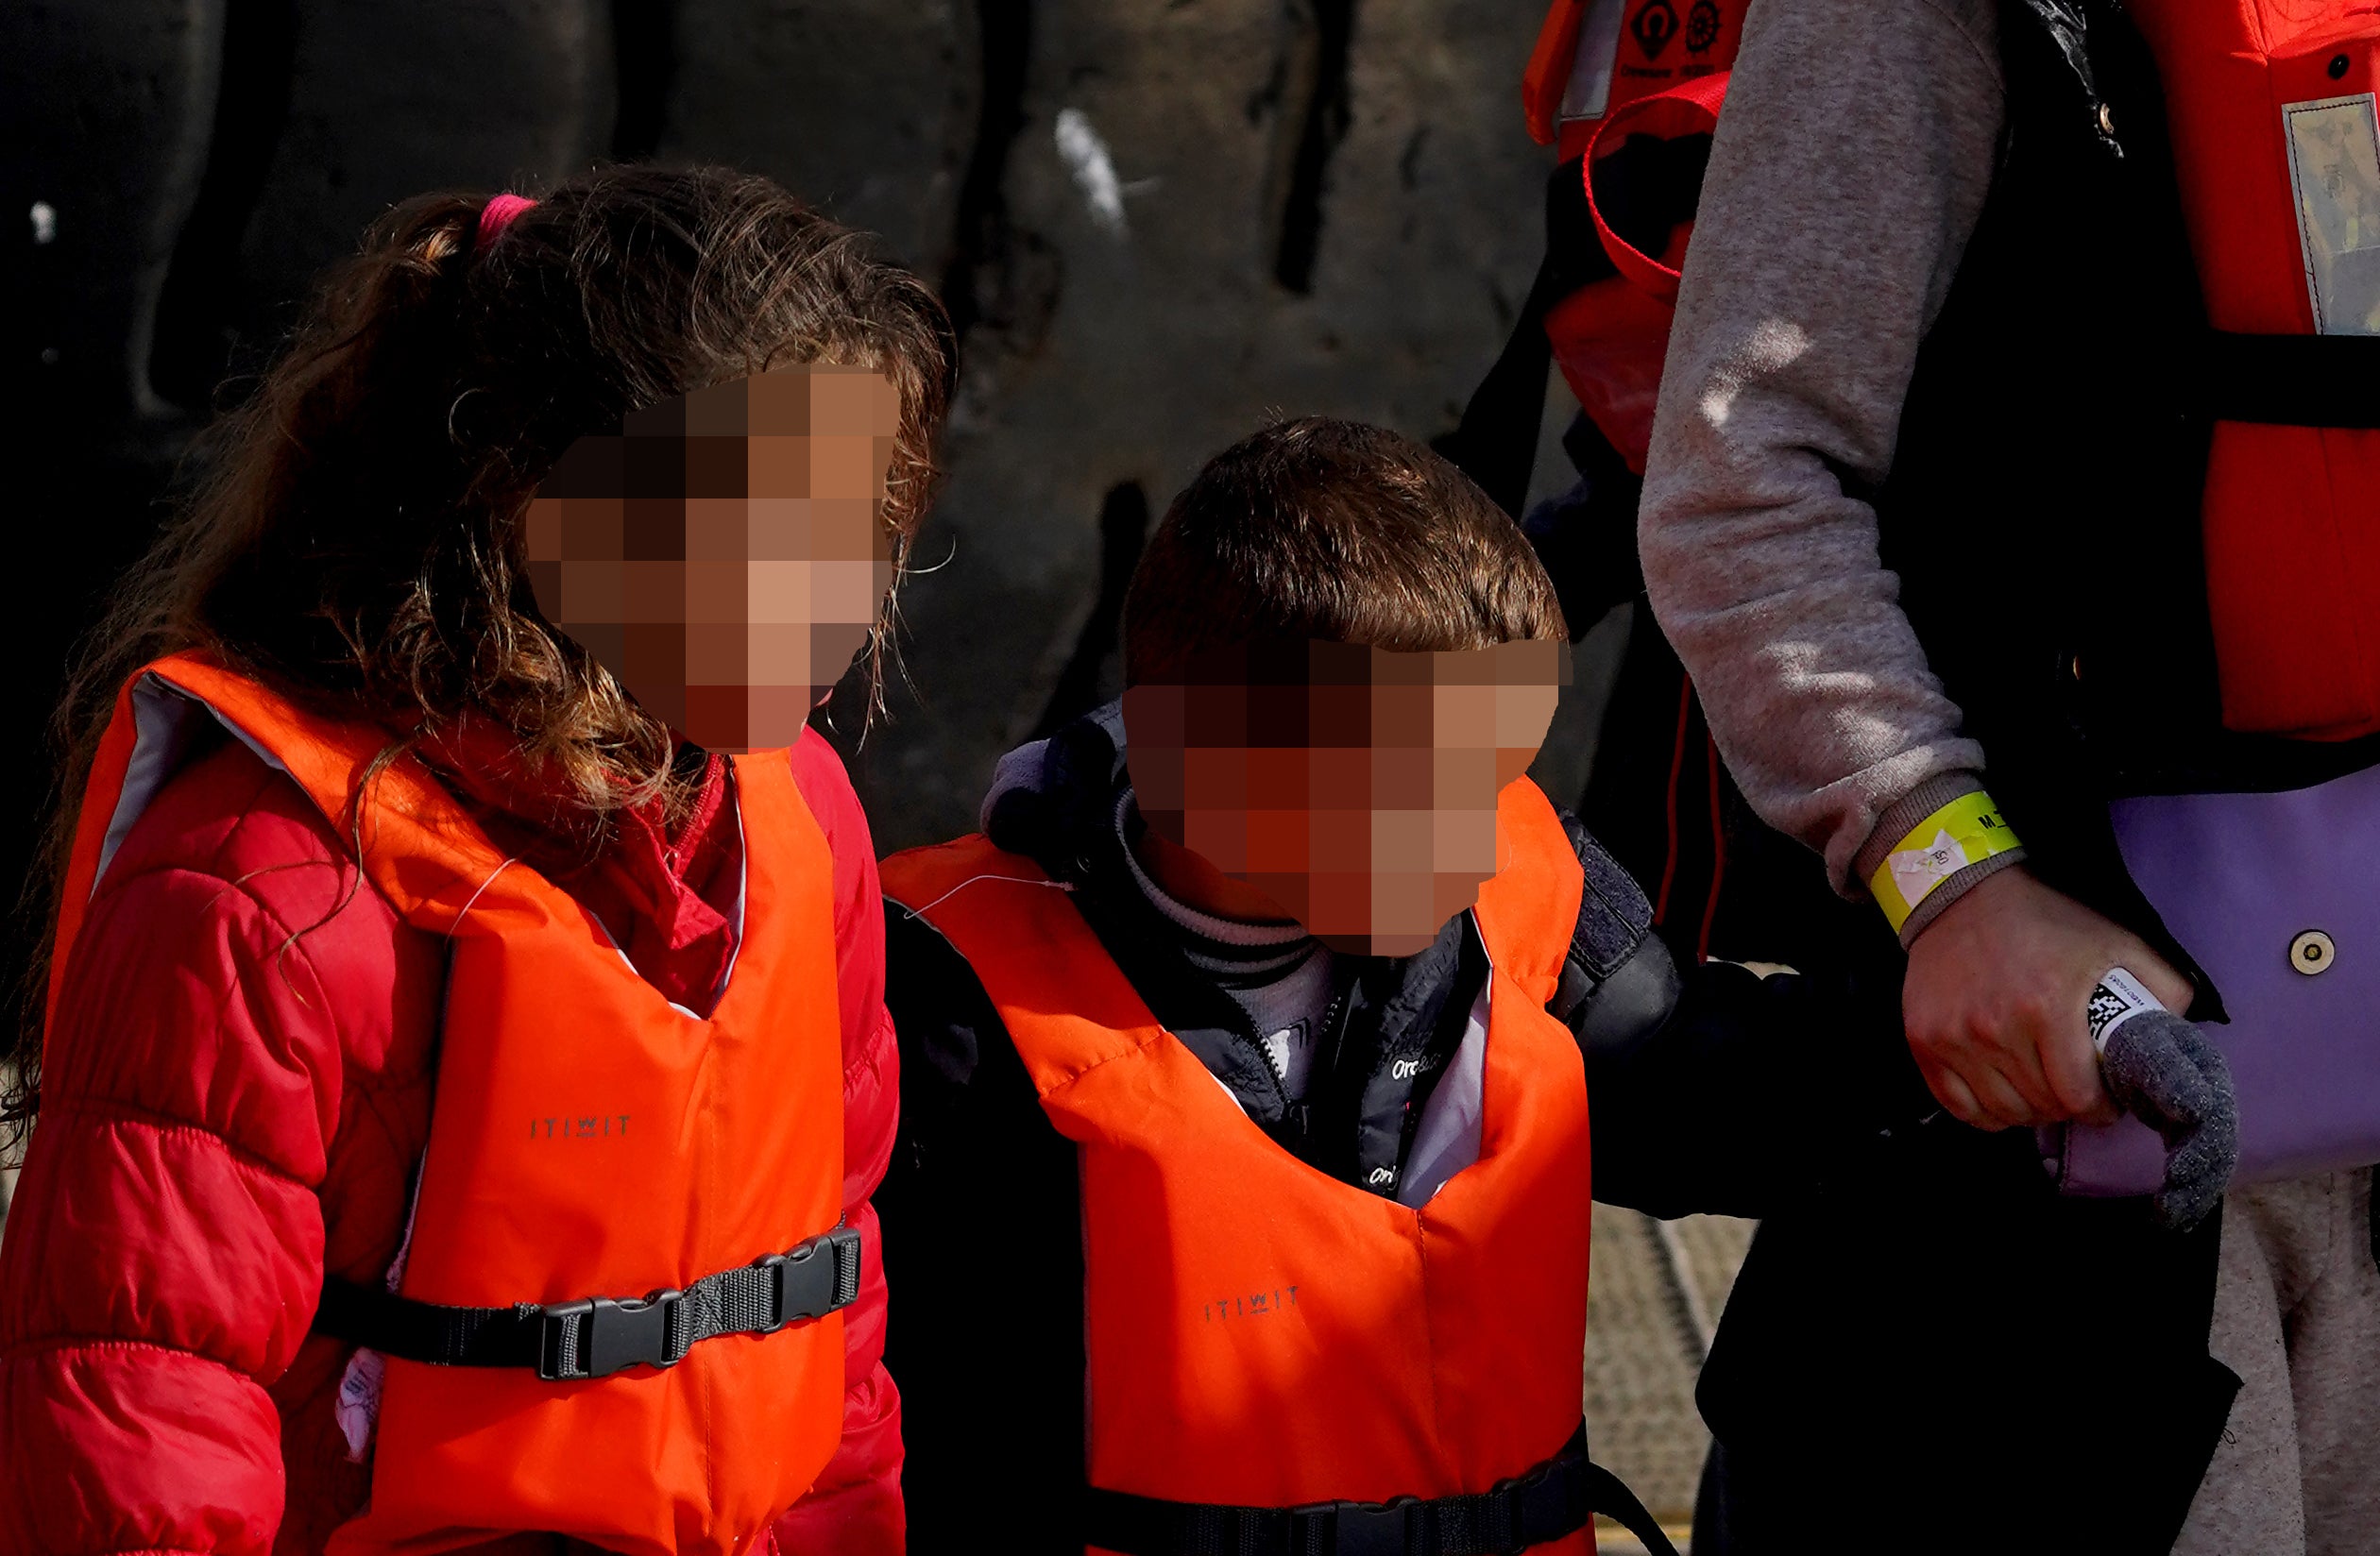 Children wrapped in blankets and wearing life jackets arrived on the south coast as the number of Channel crossings in 2022 so far edged closer to topping last year’s total (Gareth Fuller/PA)